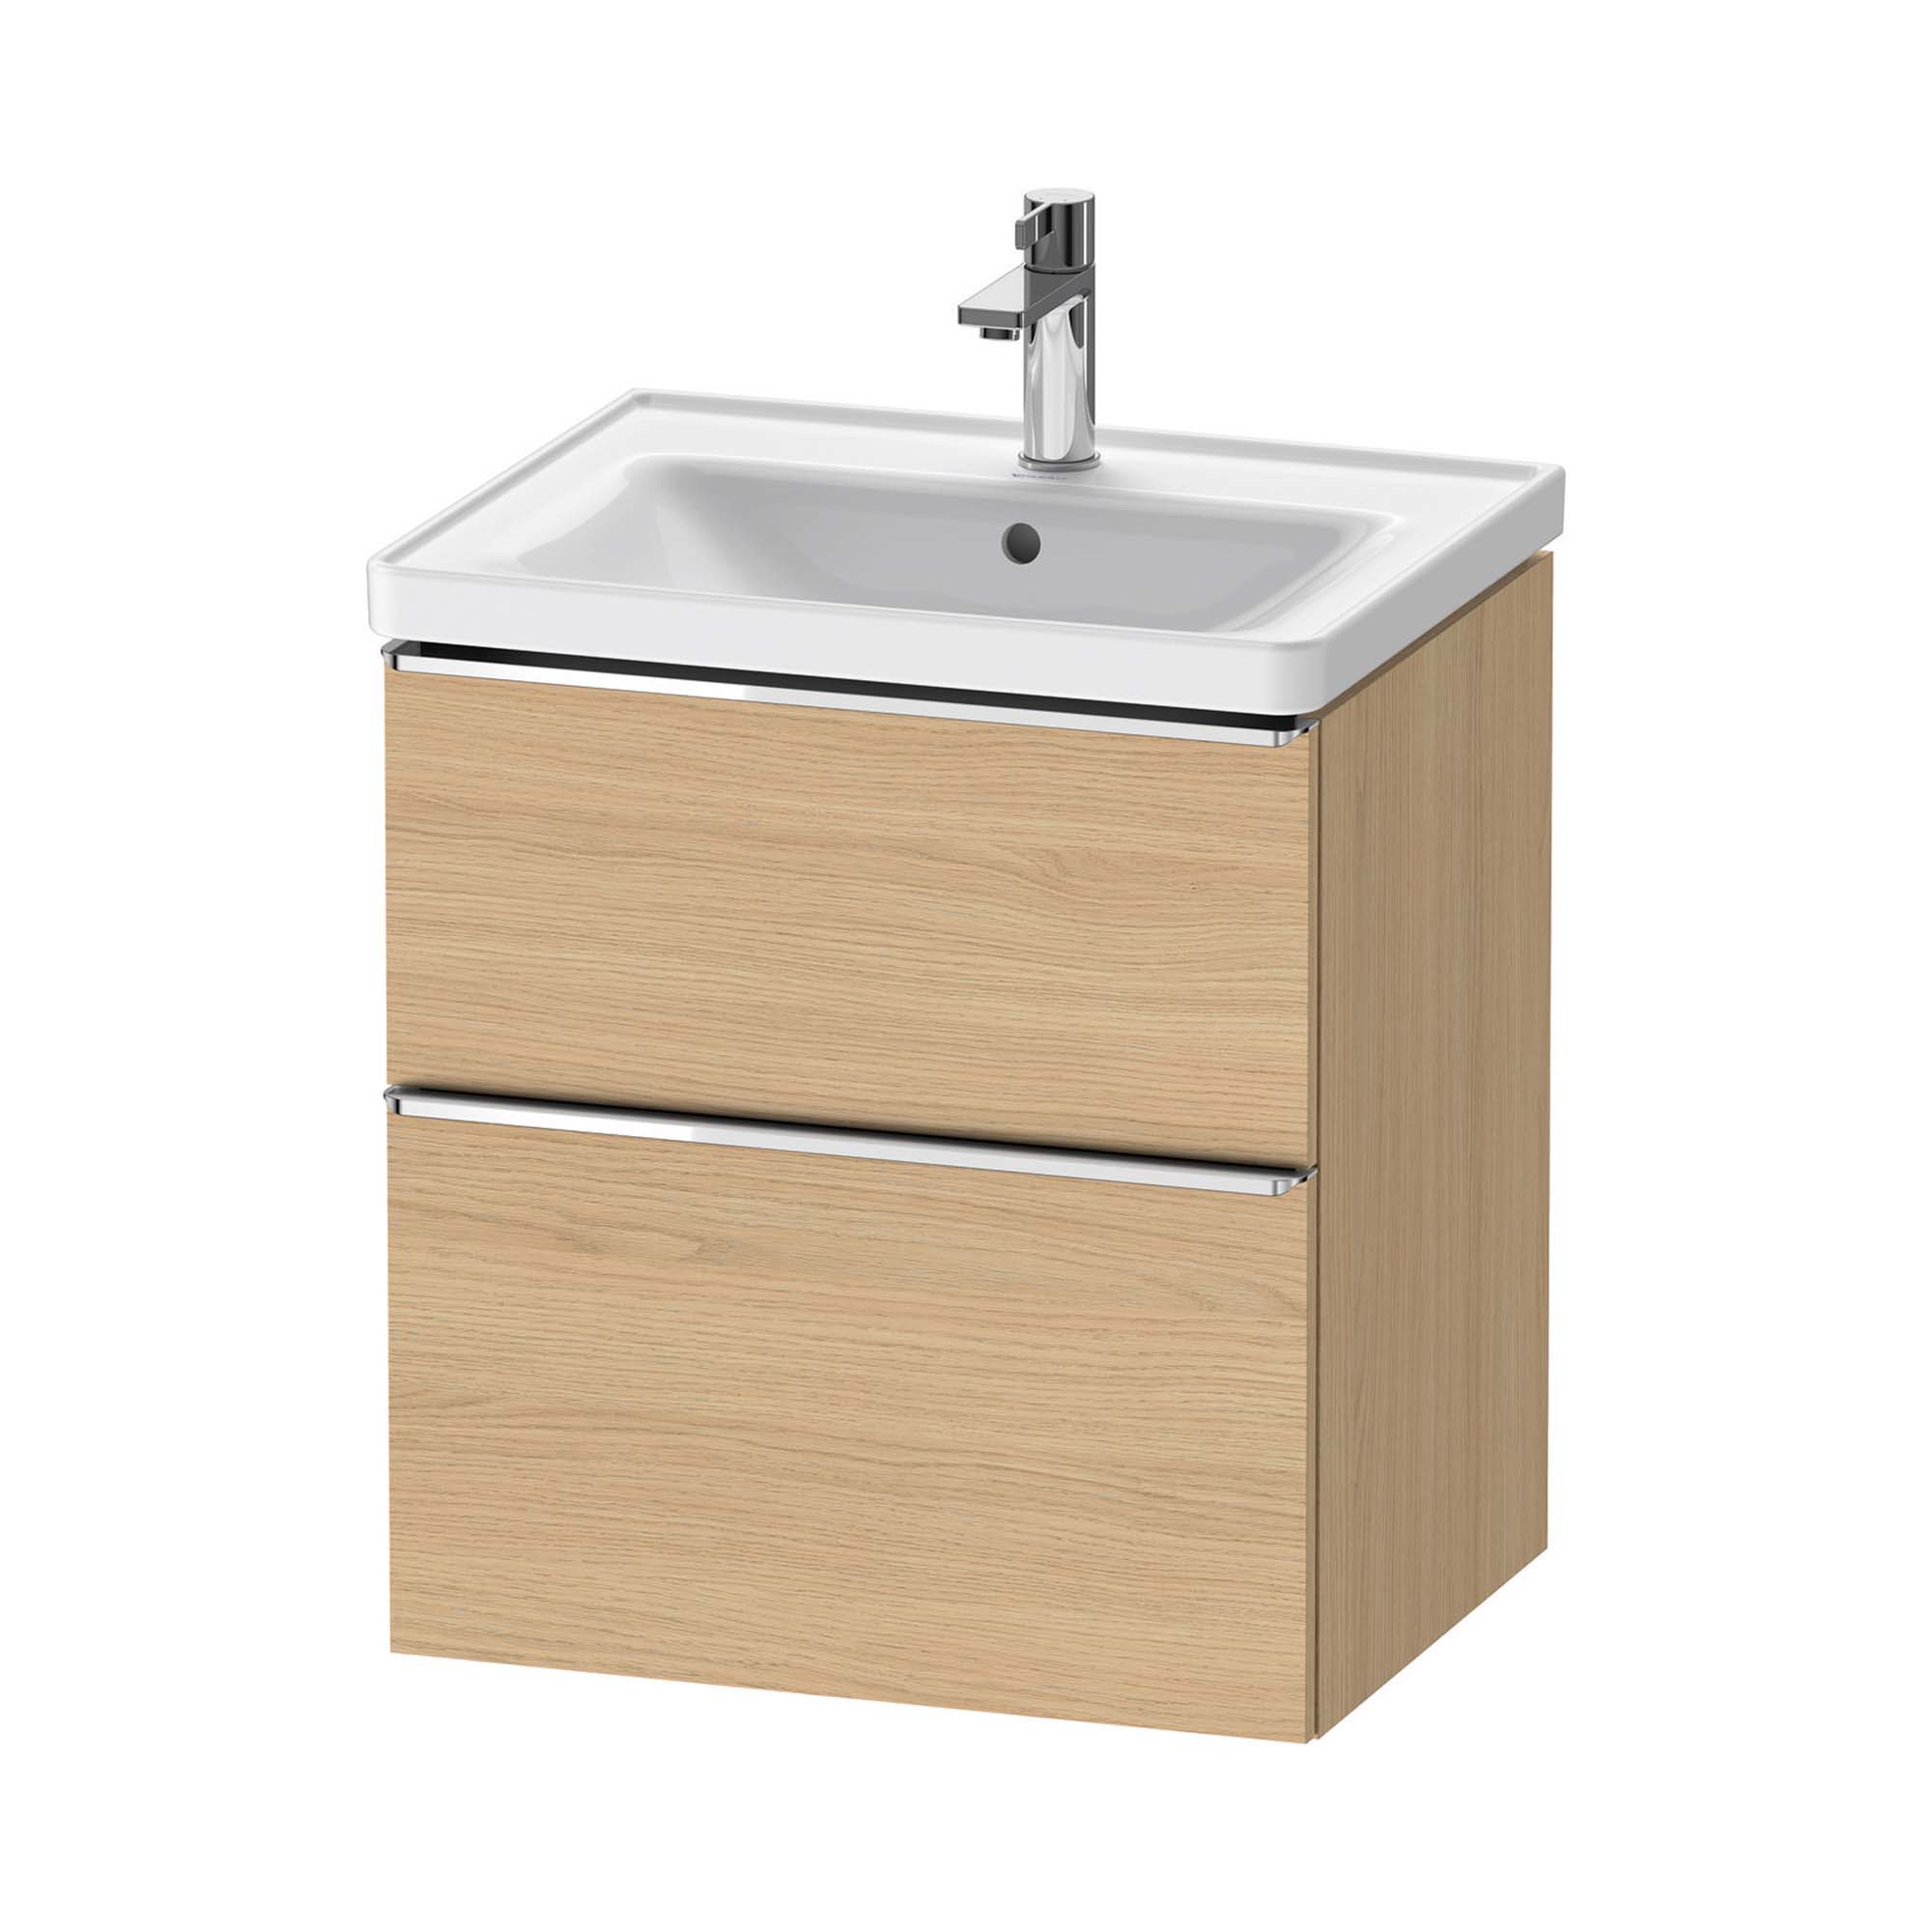 duravit d-neo 600 wall mounted vanity unit with d-neo basin natural oak chrome handles